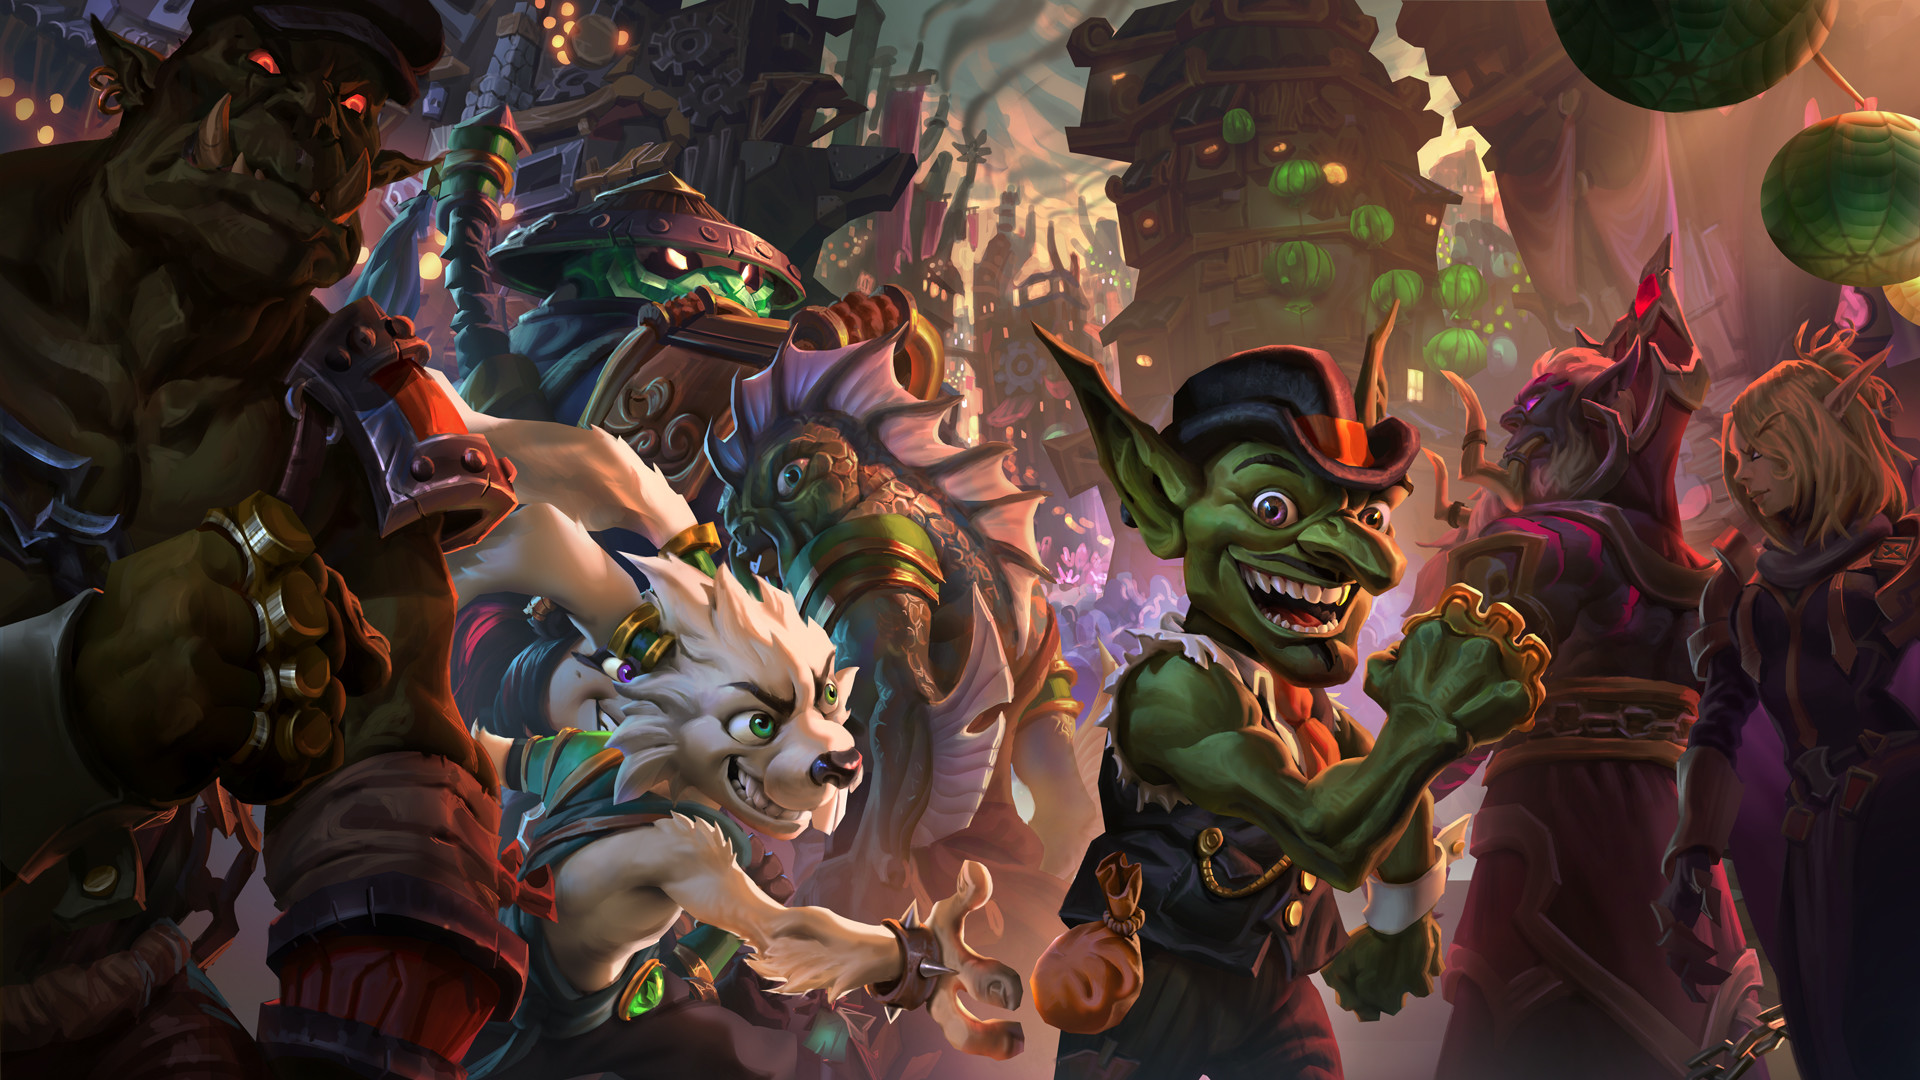 Heroes Of Warcraft, Artwork, Mean Streets Of Gadgetzan - Mean Streets Of Gadgetzan - HD Wallpaper 